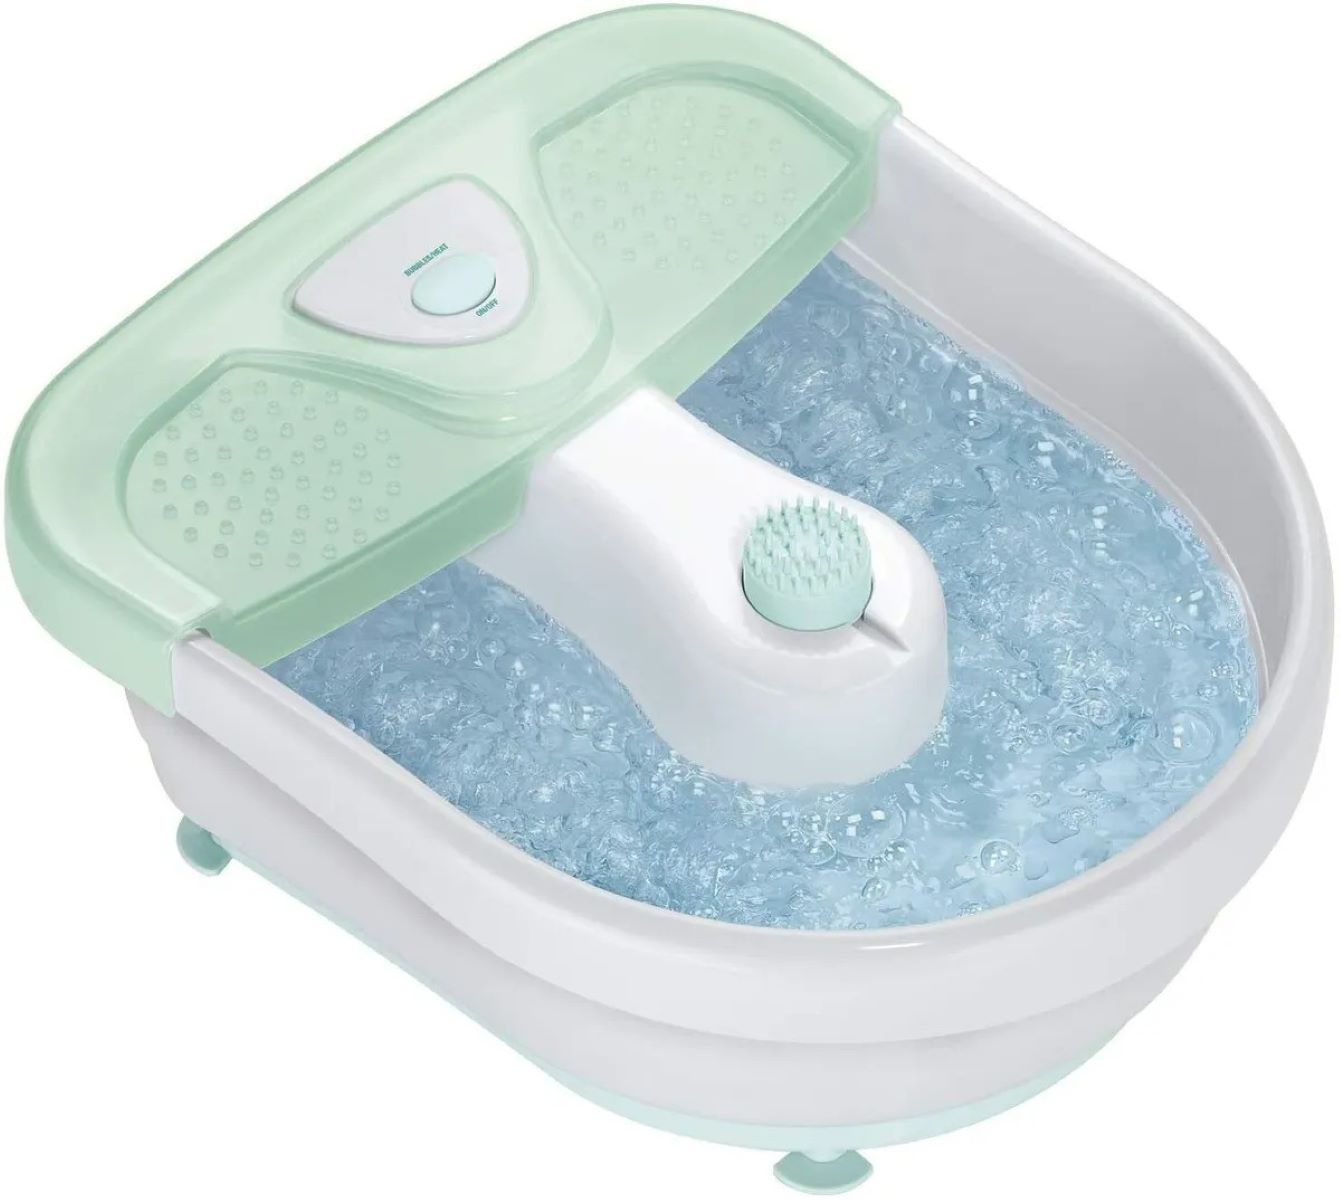 Conair Foot Spa: How To Use